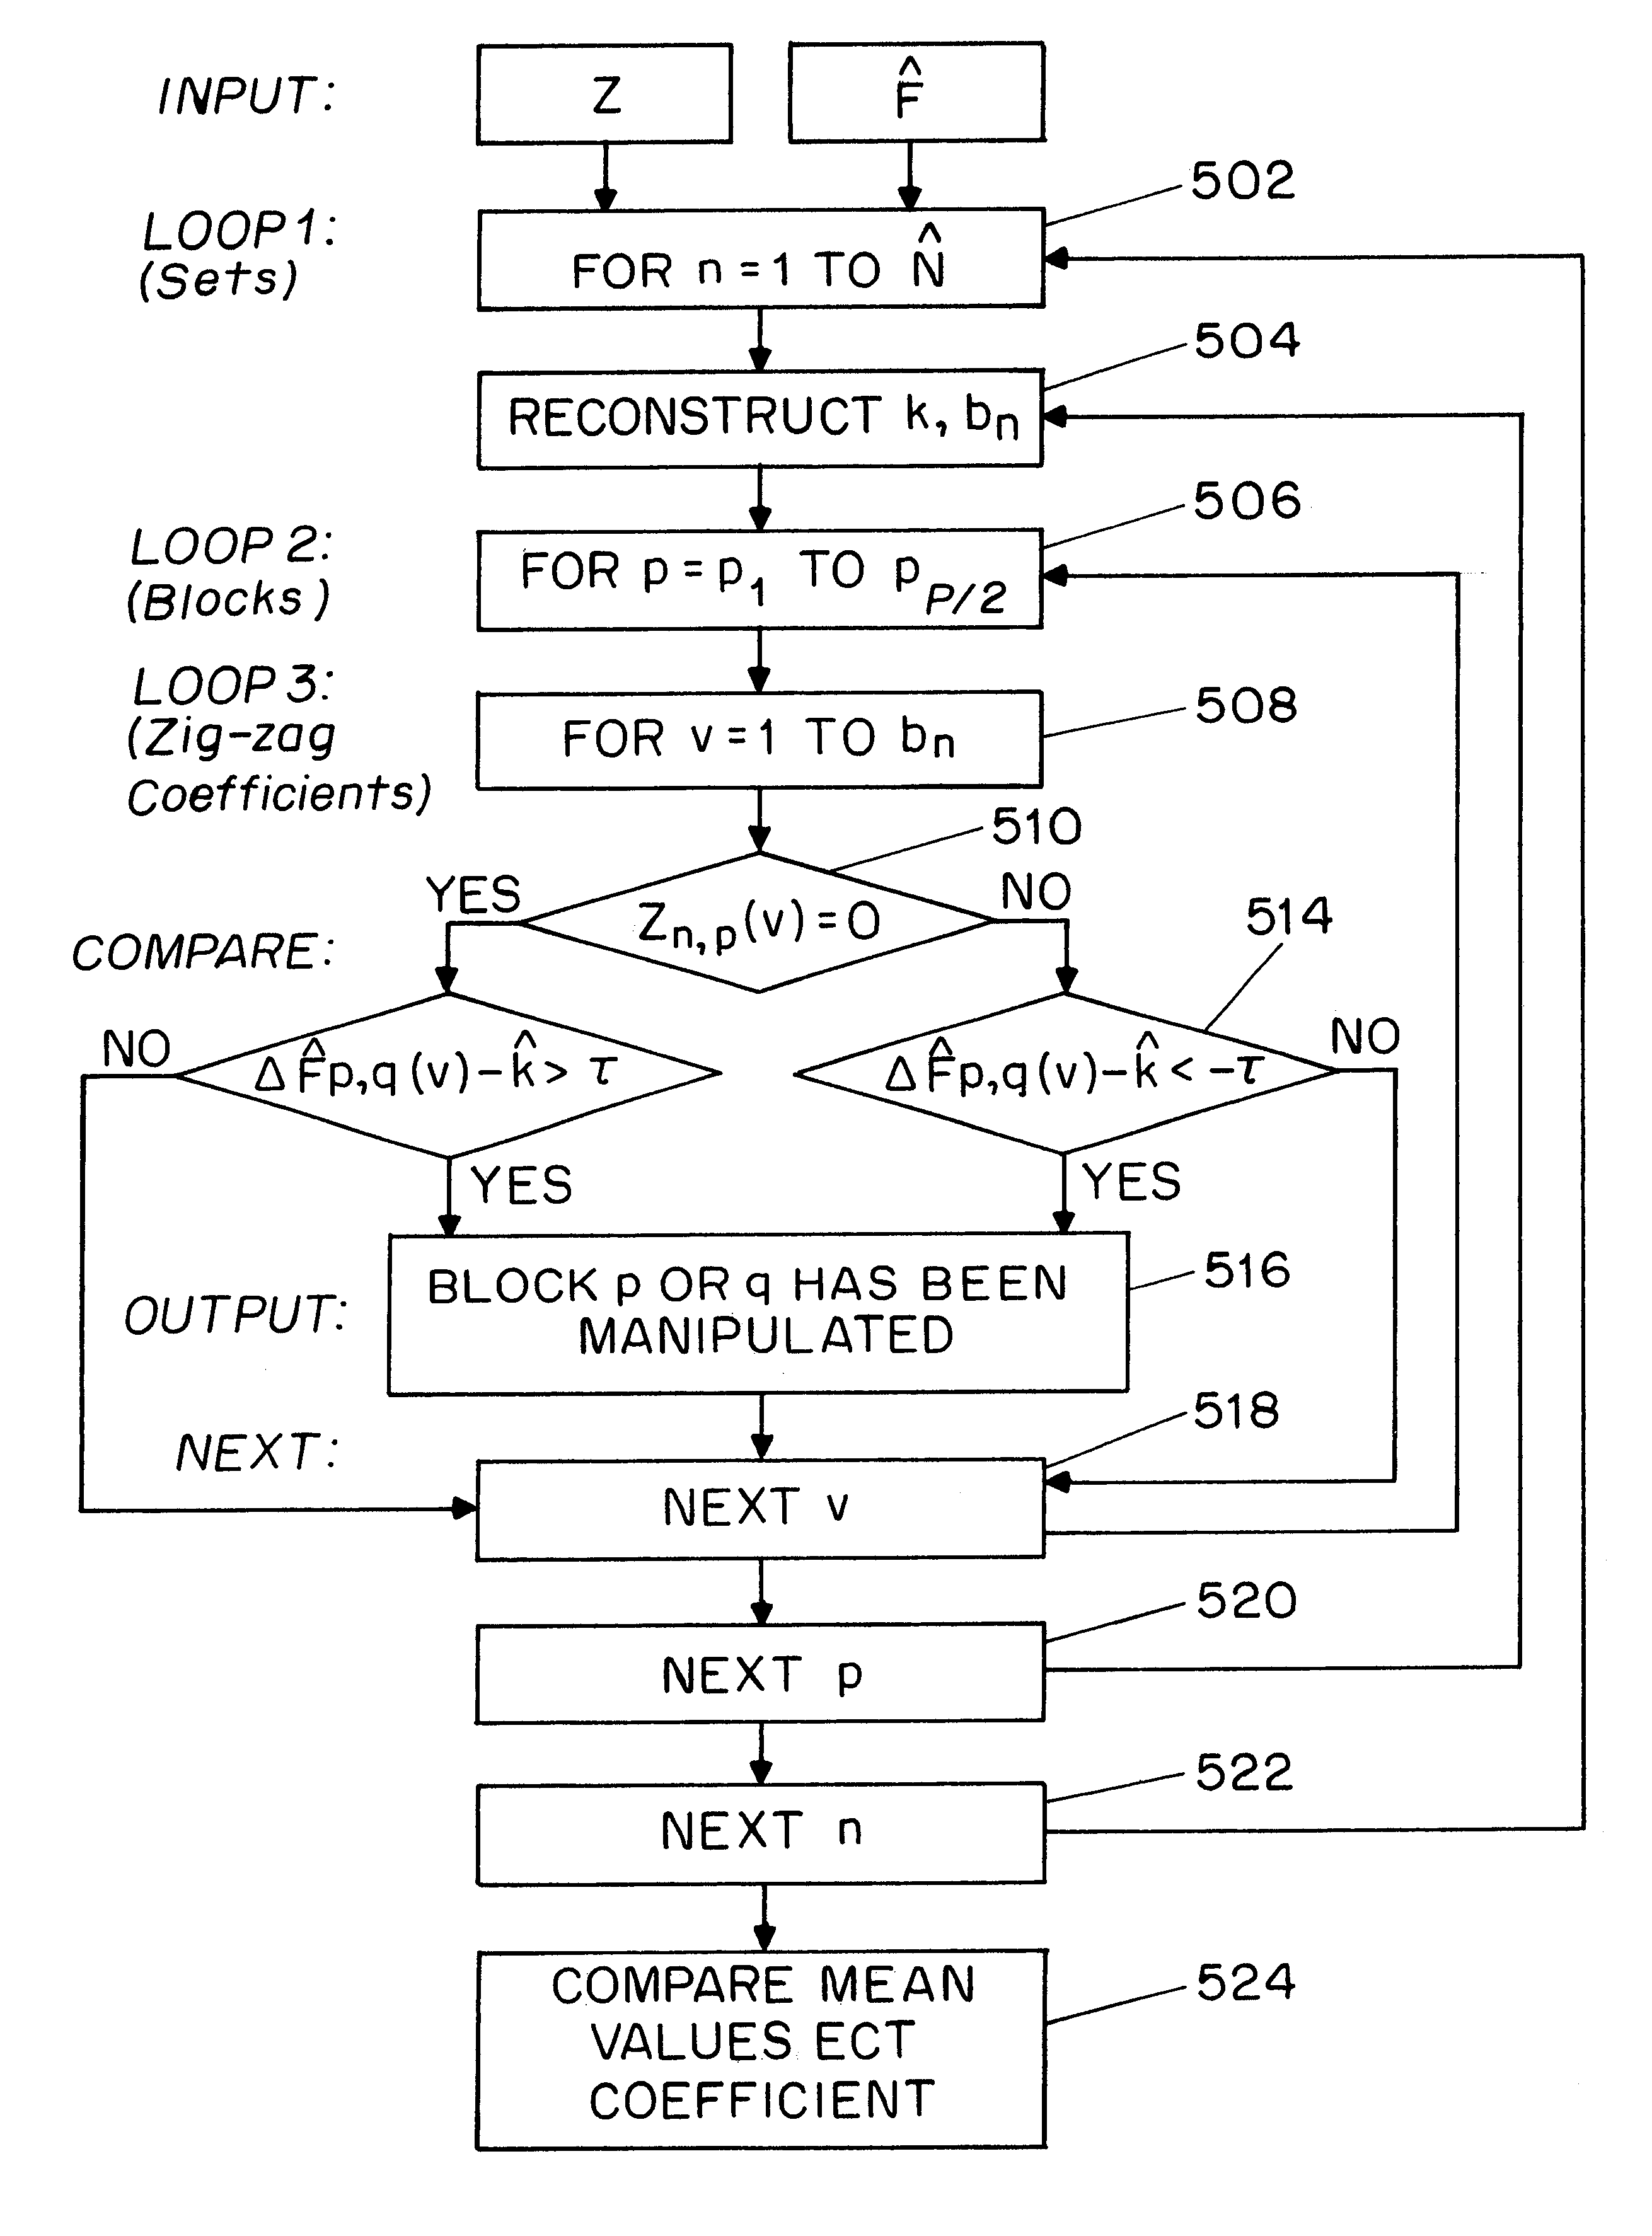 Method and apparatus for image authentication